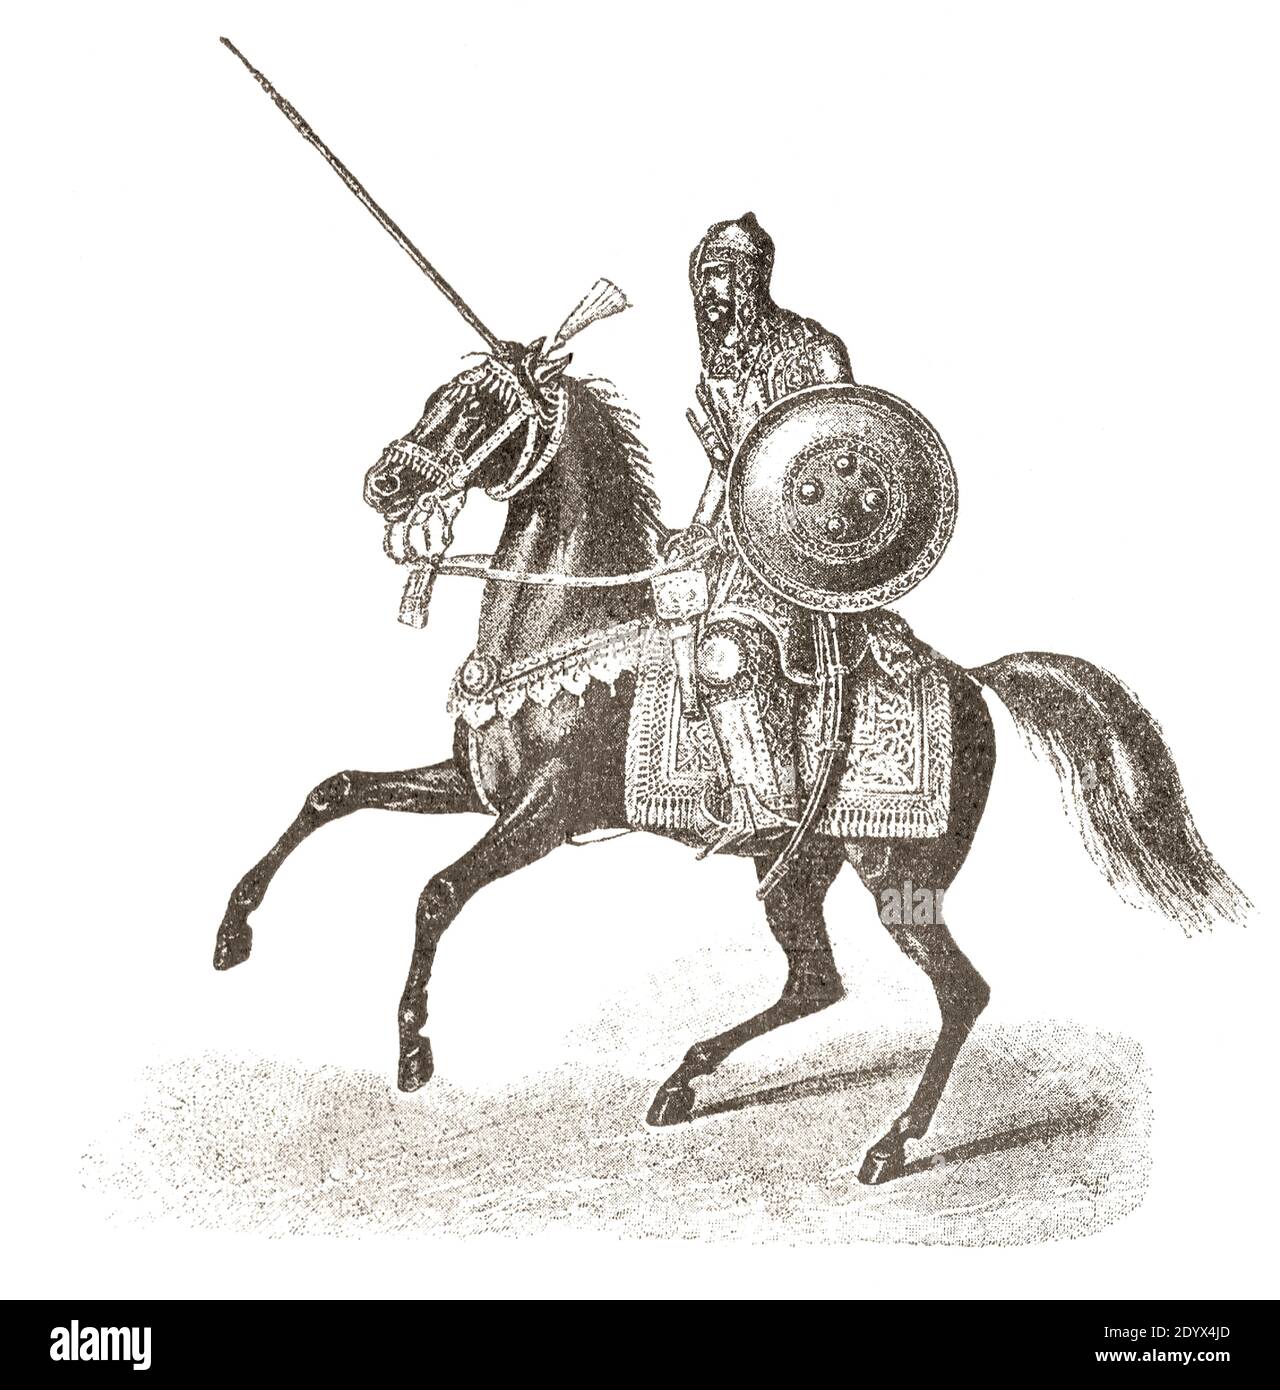 Indo Muslim armor of the 17th century for the equestrian warrior. The engraving of the 19th century. Stock Photo